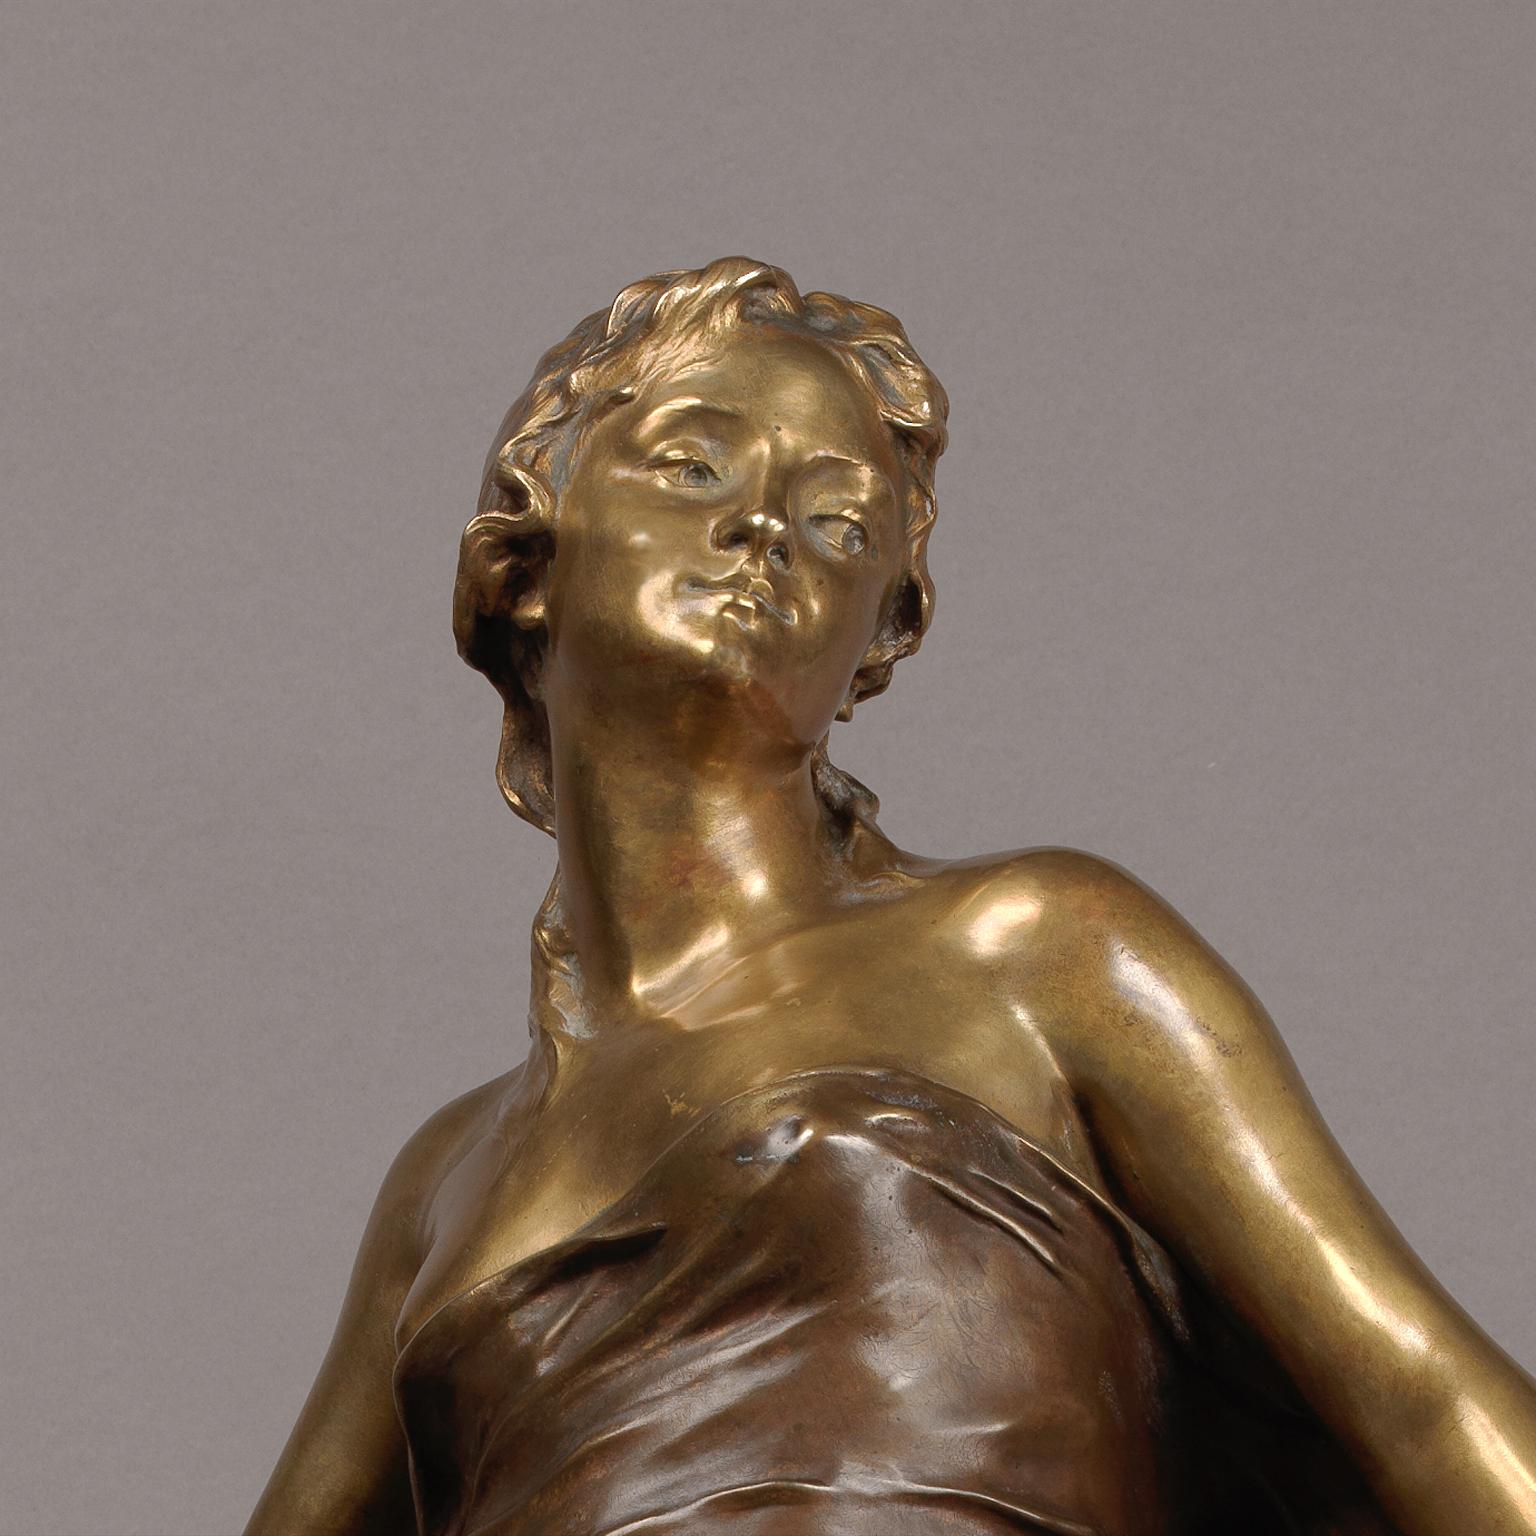 'Cupid & Psyche' - An important parcel-gilt and patinated bronze figure, by François-Raoul Larche. 

Signed to the base 'Raoul Larche 1891'.

This finely cast parcel-gilt bronze figure depicts Cupid and Psyche with Zephyr. 

François-Raoul